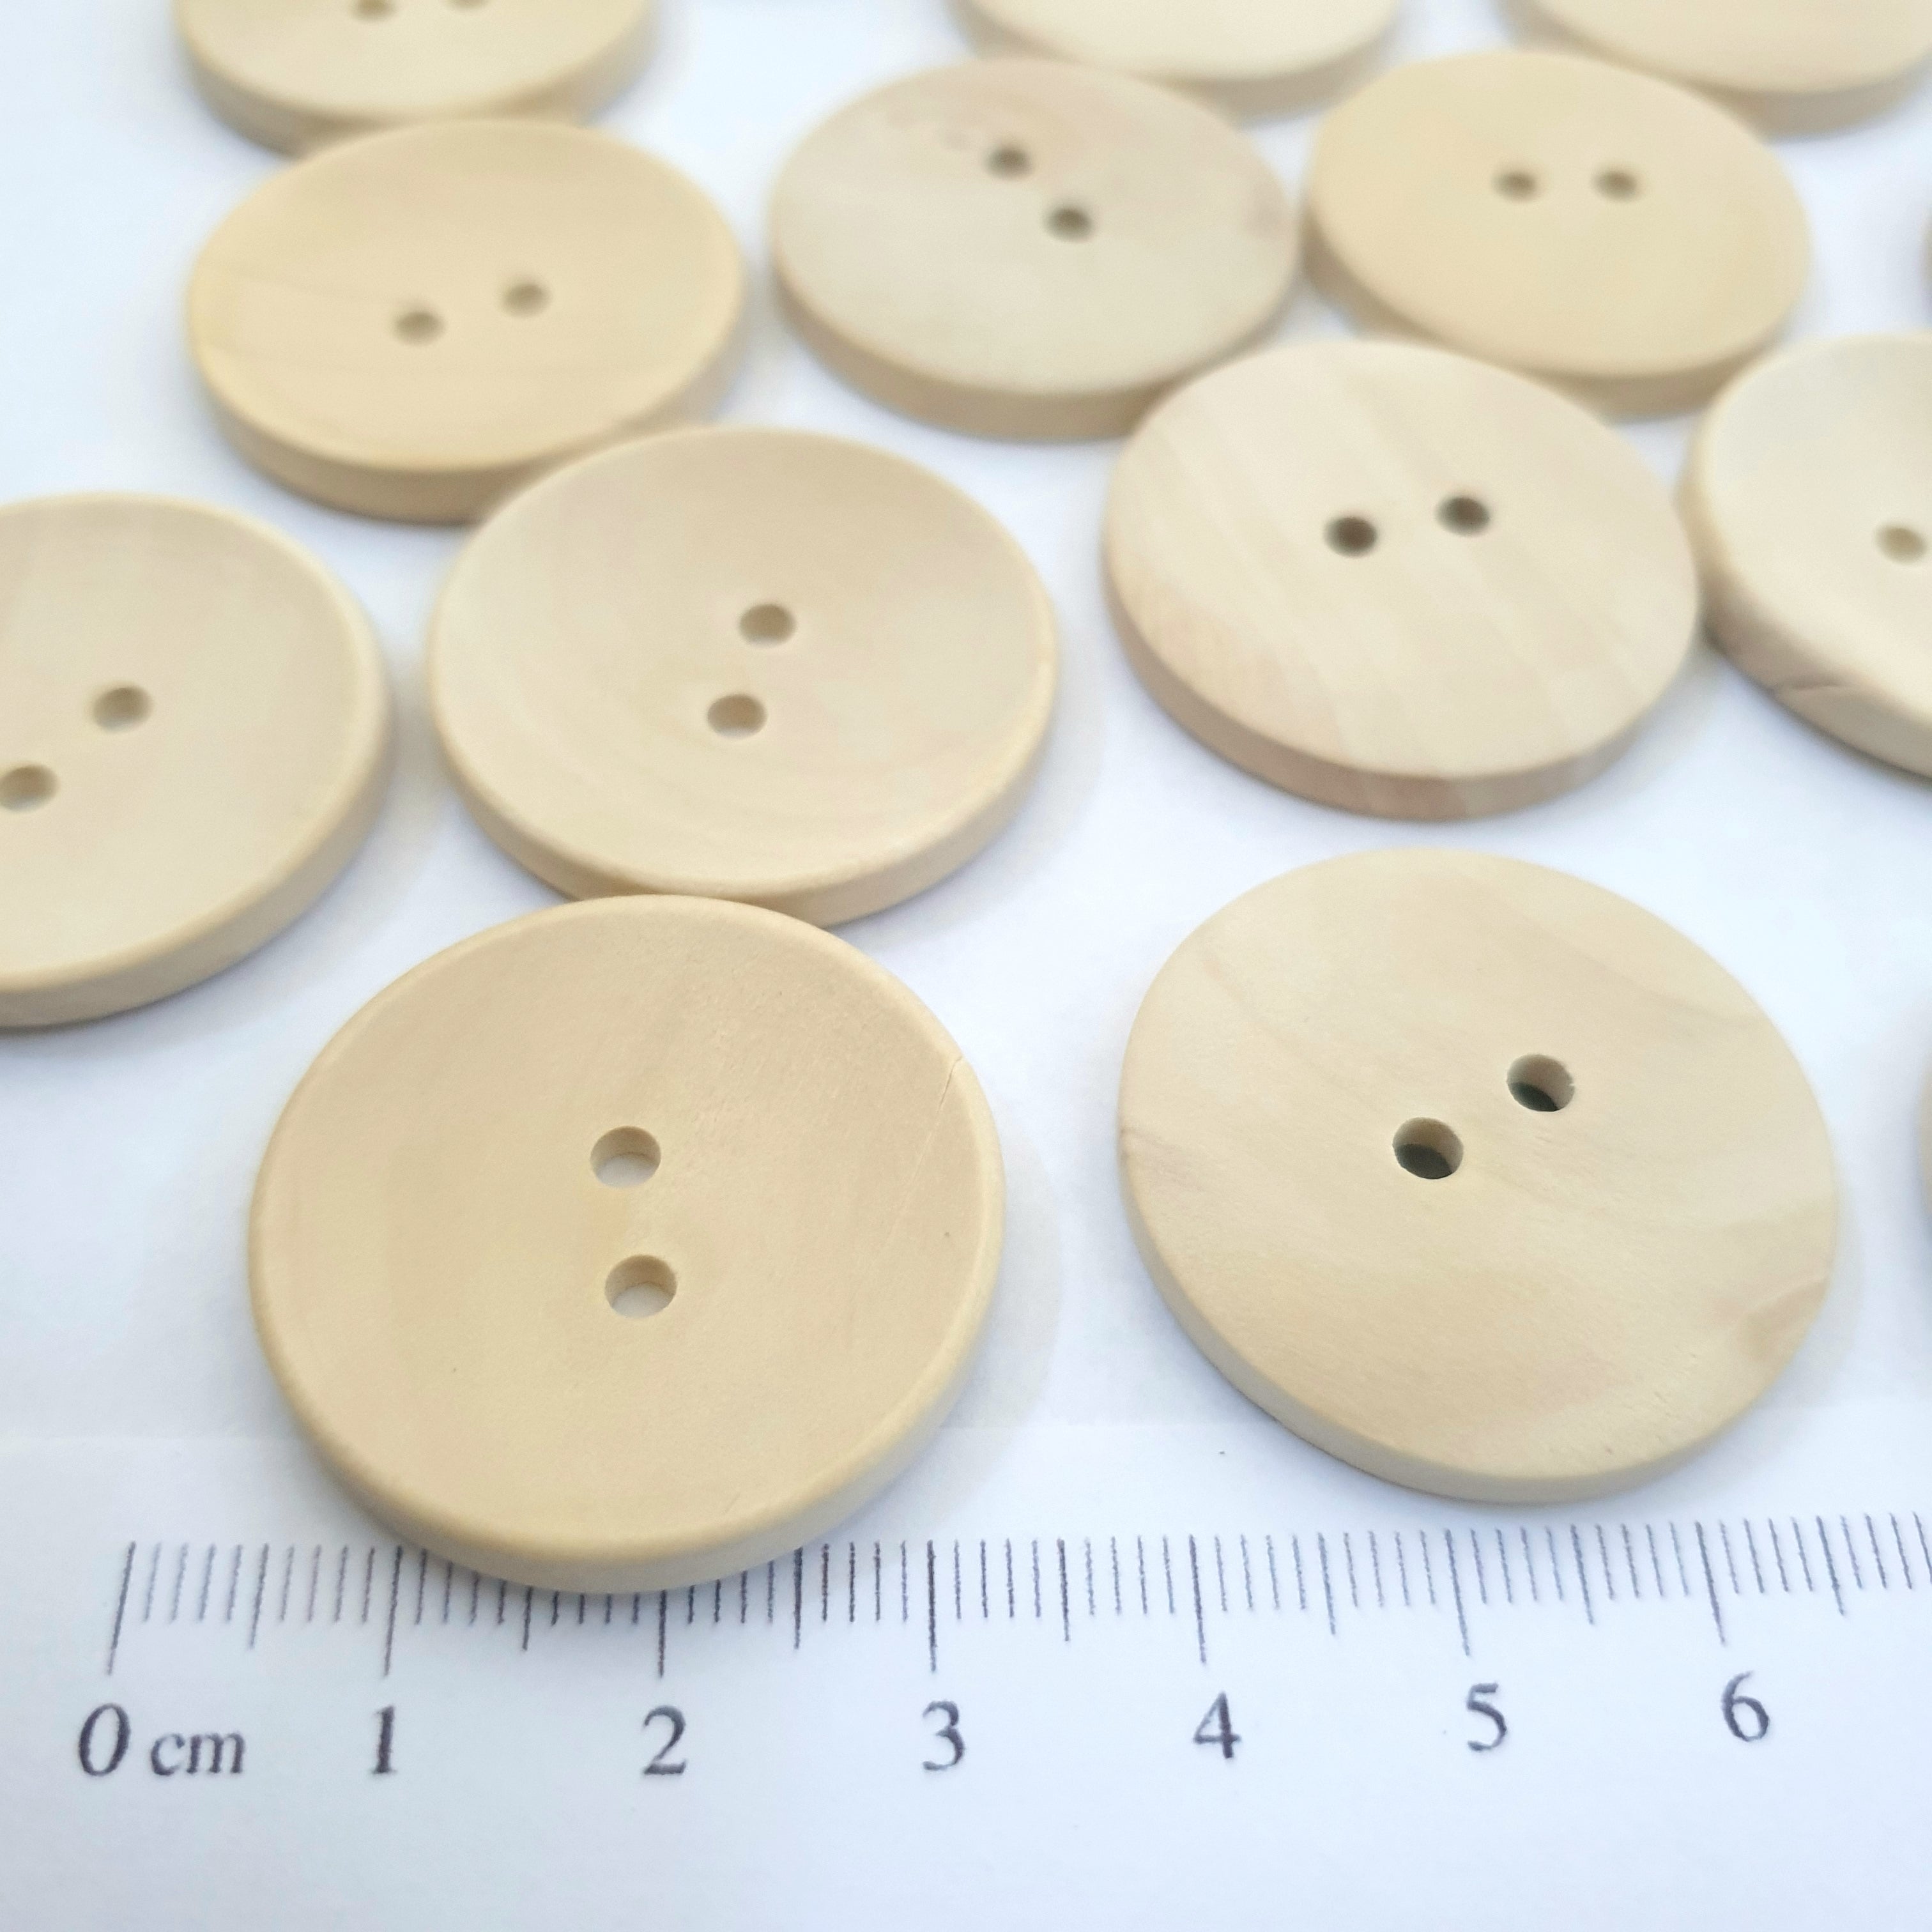 MajorCrafts 20pcs 30mm Light Brown Plain 2 Holes Round Large Wooden Sewing Buttons